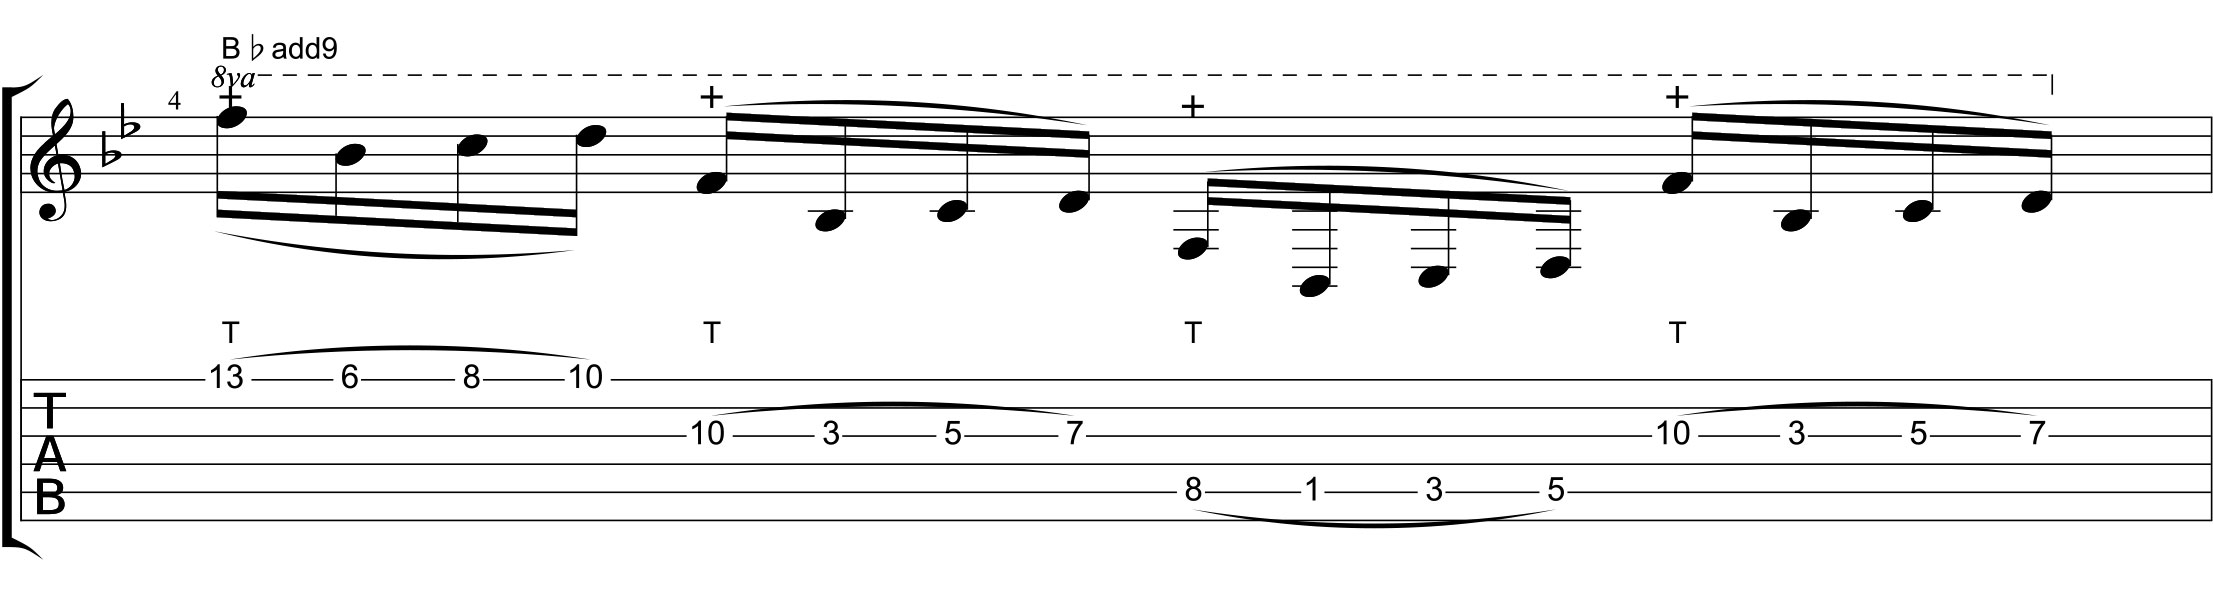 String Skipping Tapping Étude: Added Tone Arpeggio Ideas Over 3 Octaves |  Shredaholic.com | Mobile Version